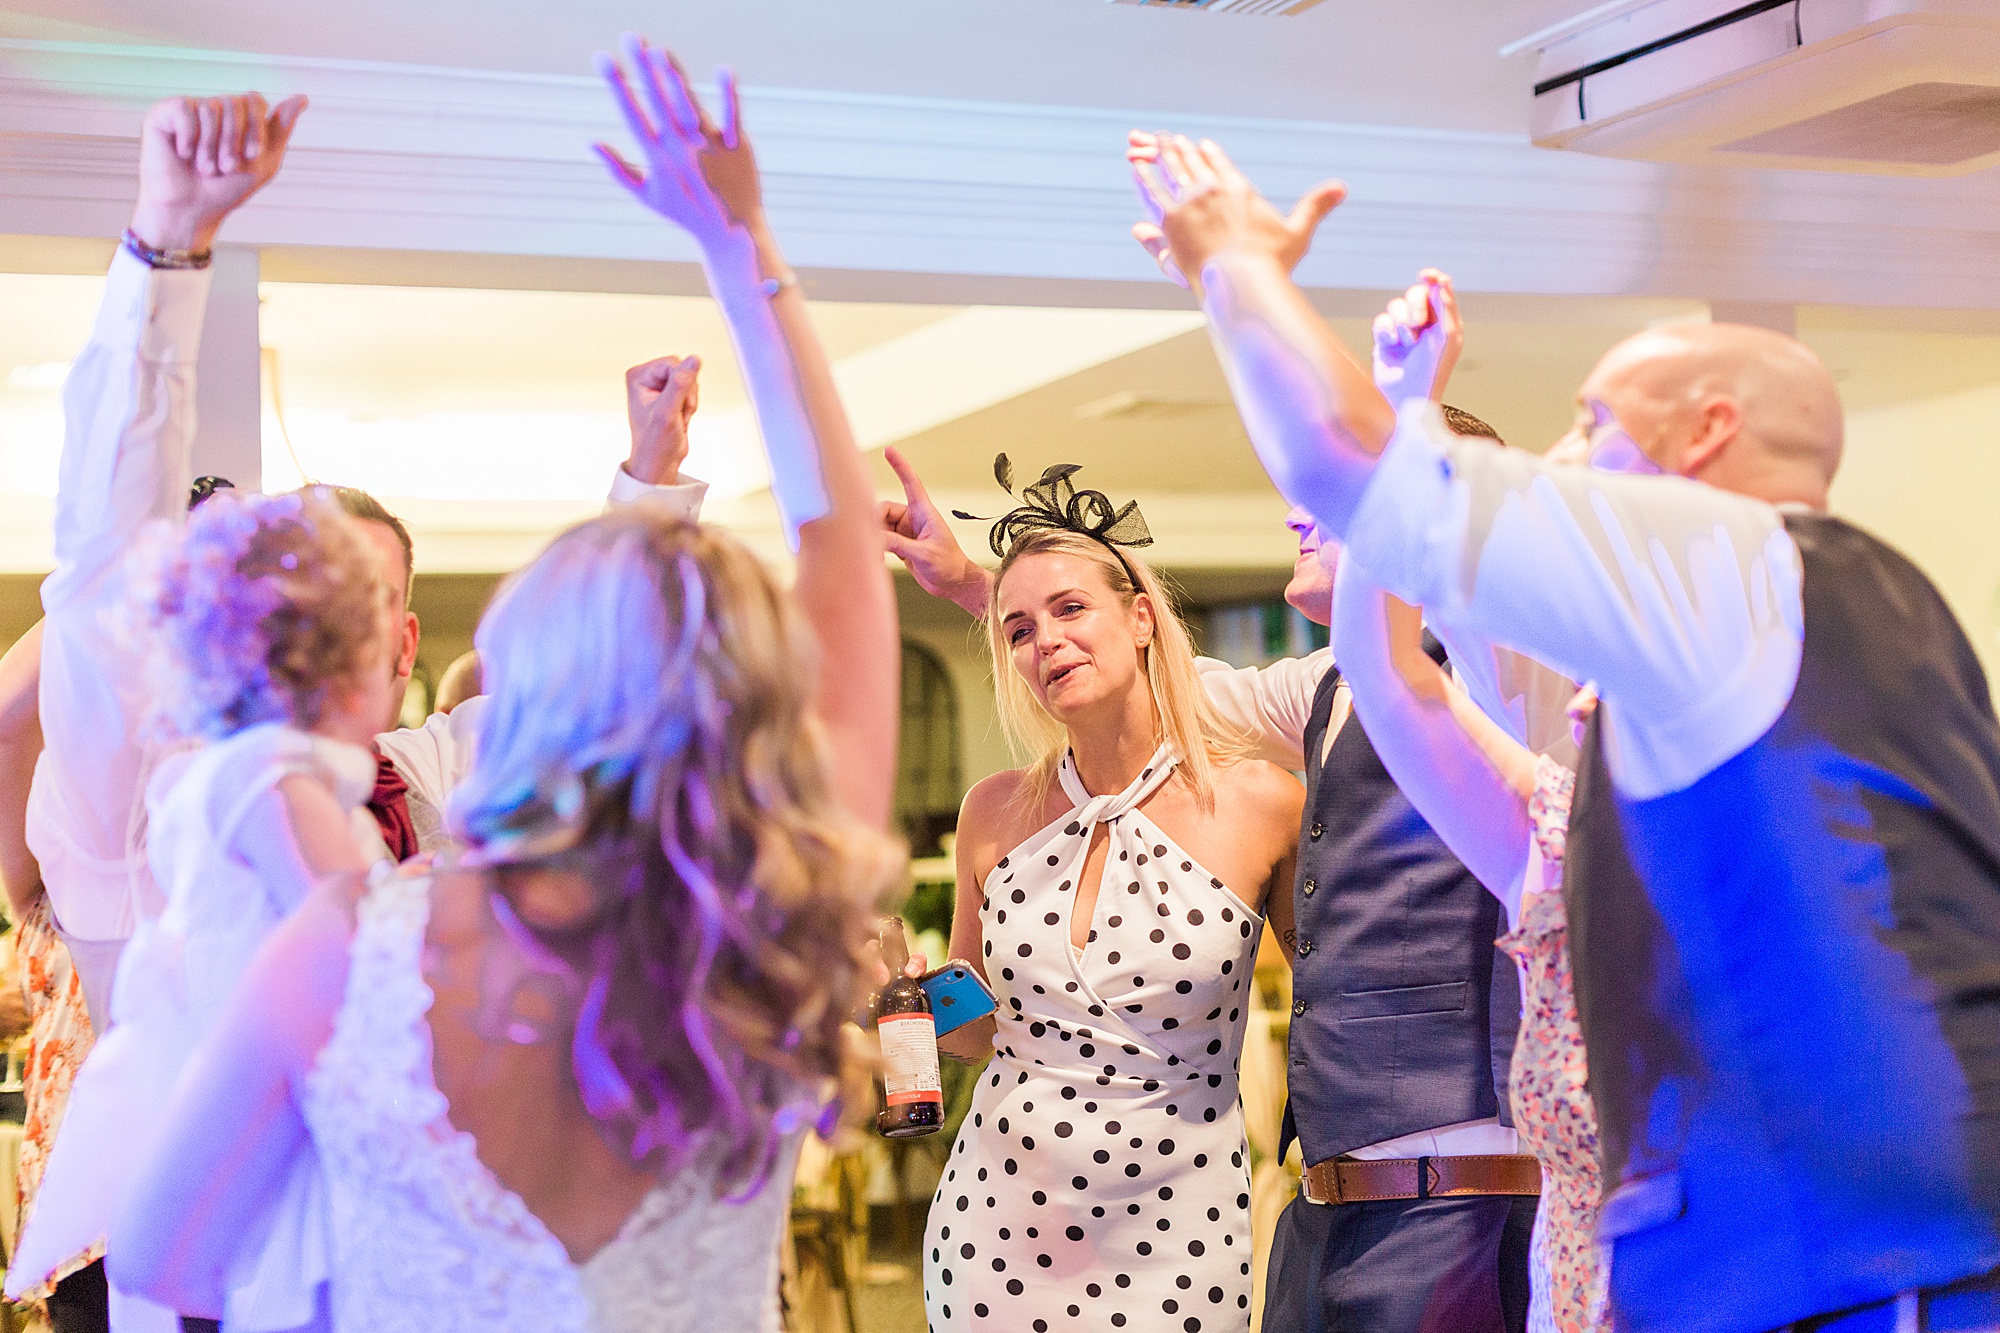 image shows guests dancing and singing at a wedding reception in the evening, they've got their hands in the air